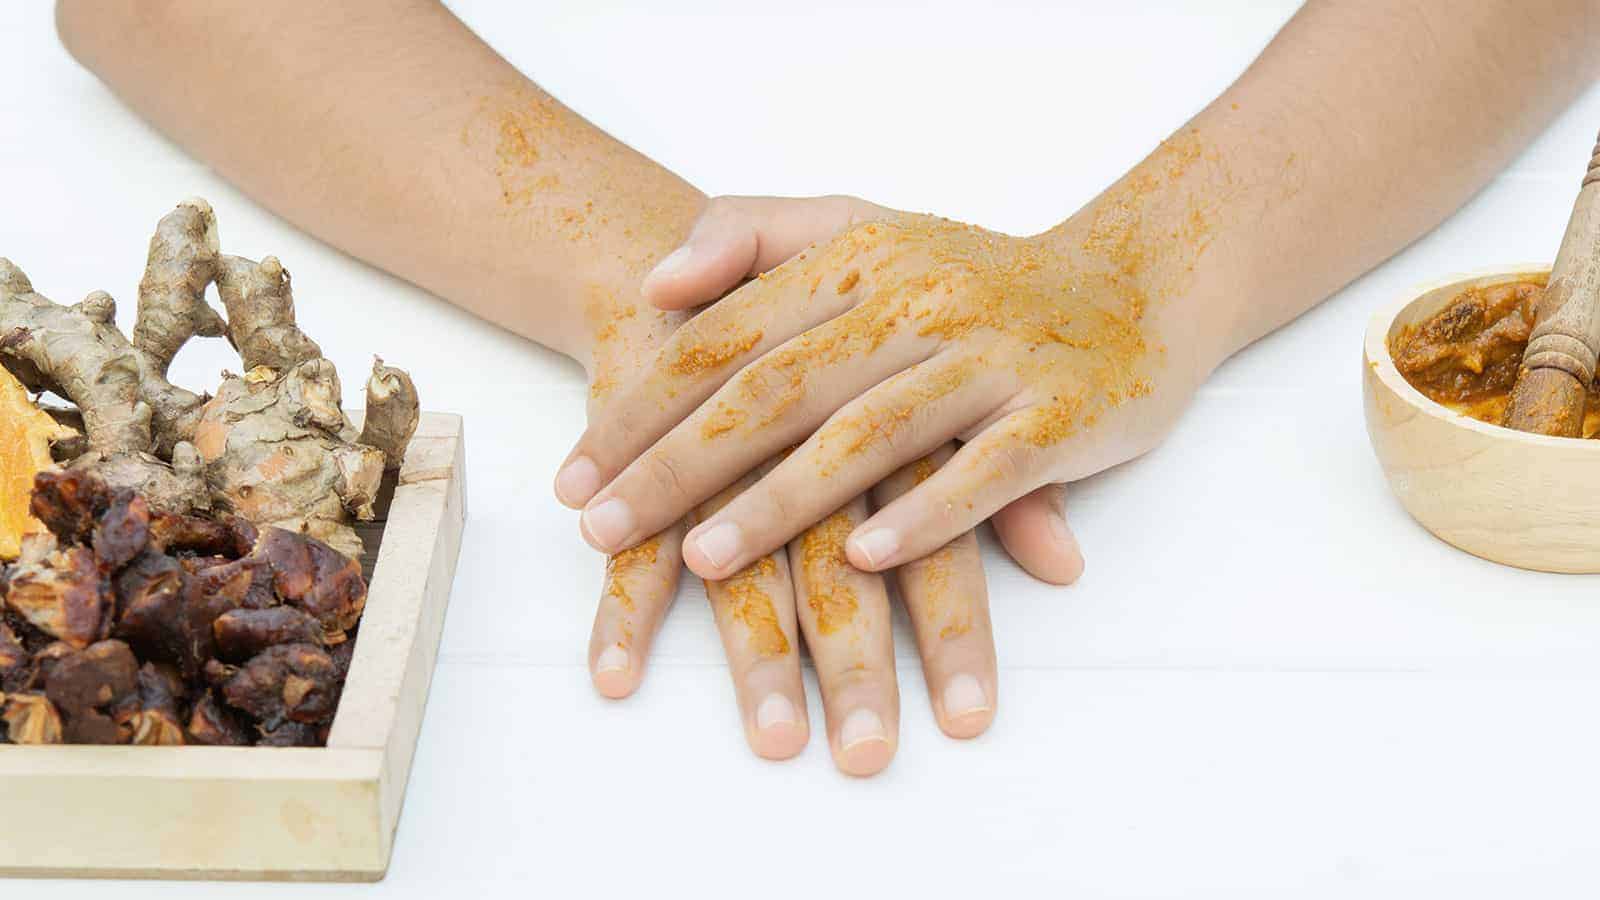 12 Proven Benefits of Turmeric for Skin